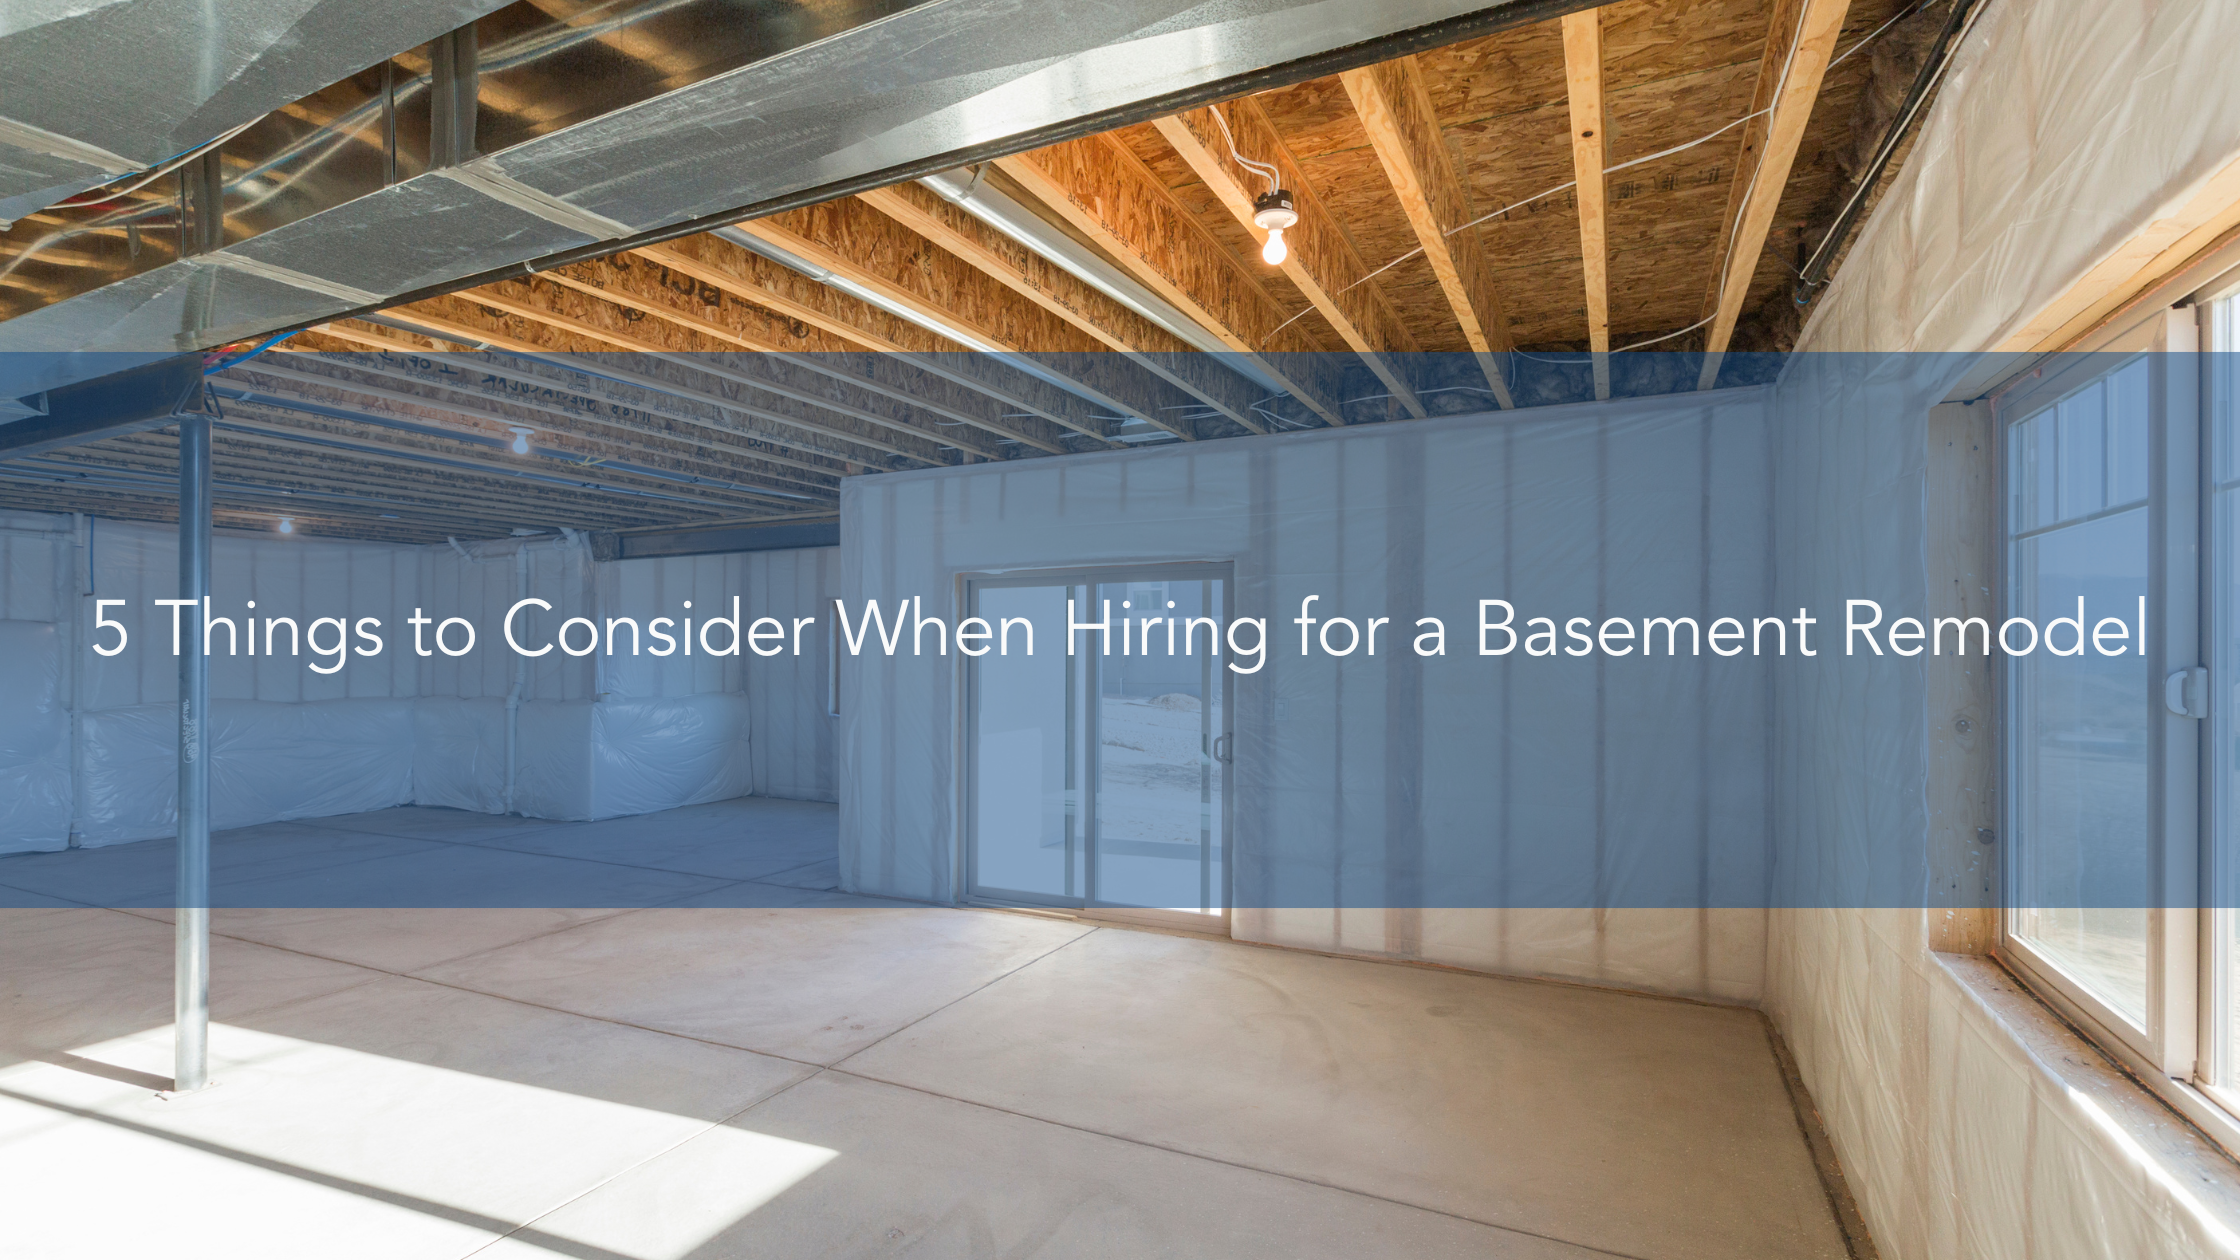 https://handymanconnection.com/wp-content/uploads/2022/09/5-Things-to-Consider-When-Hiring-for-a-Basement-Remodel.png